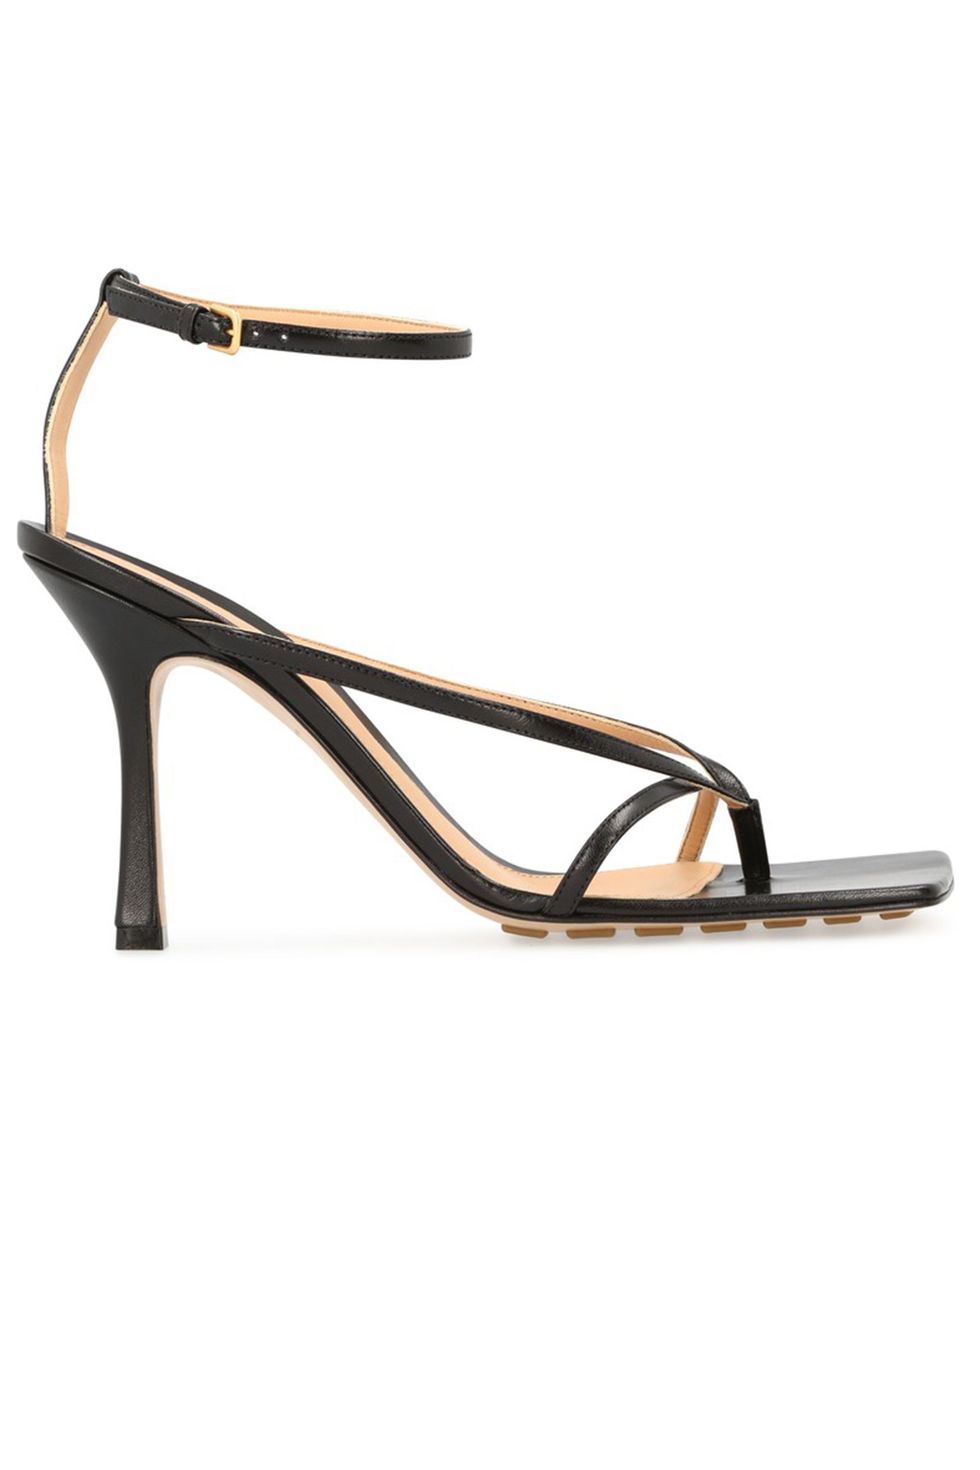 The strappy heel